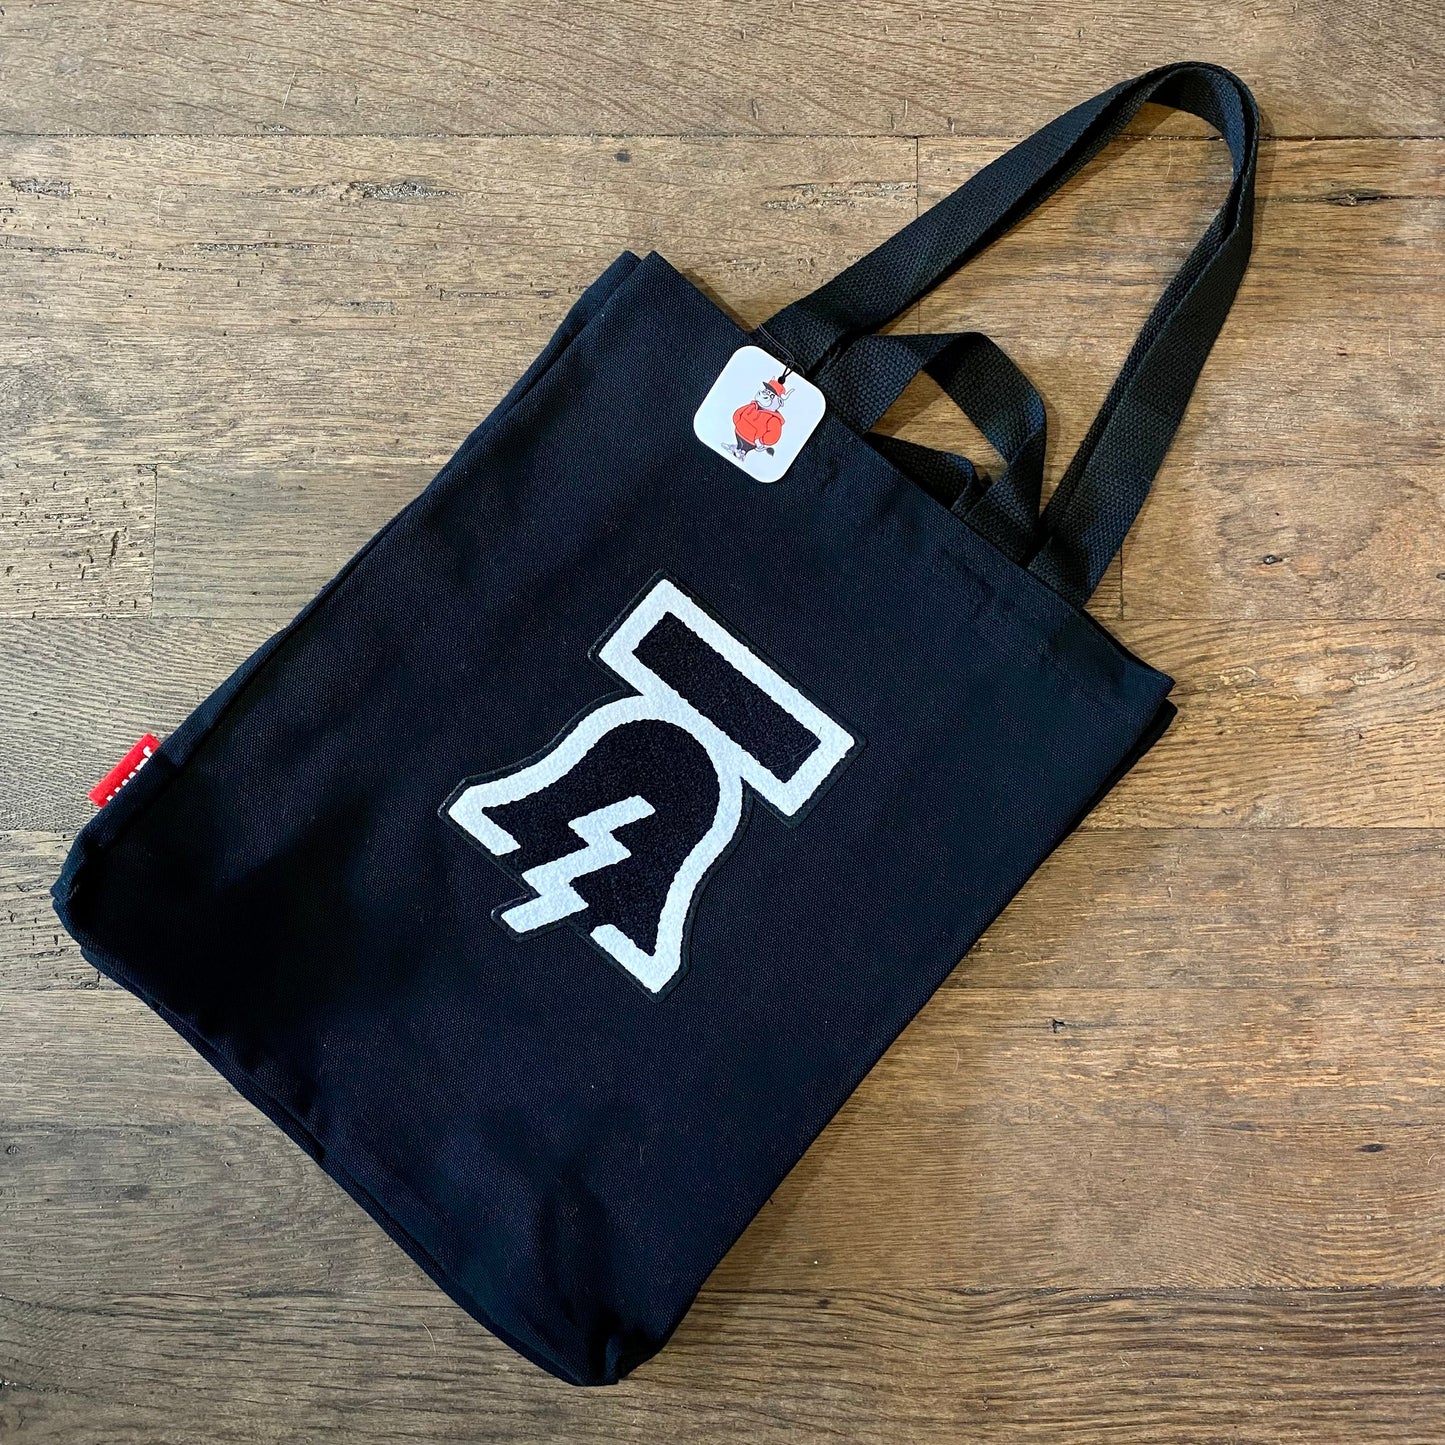 Bell & Bolt Patch Tote Bag by Tote Jawn with white lightning bolt design on wooden floor.